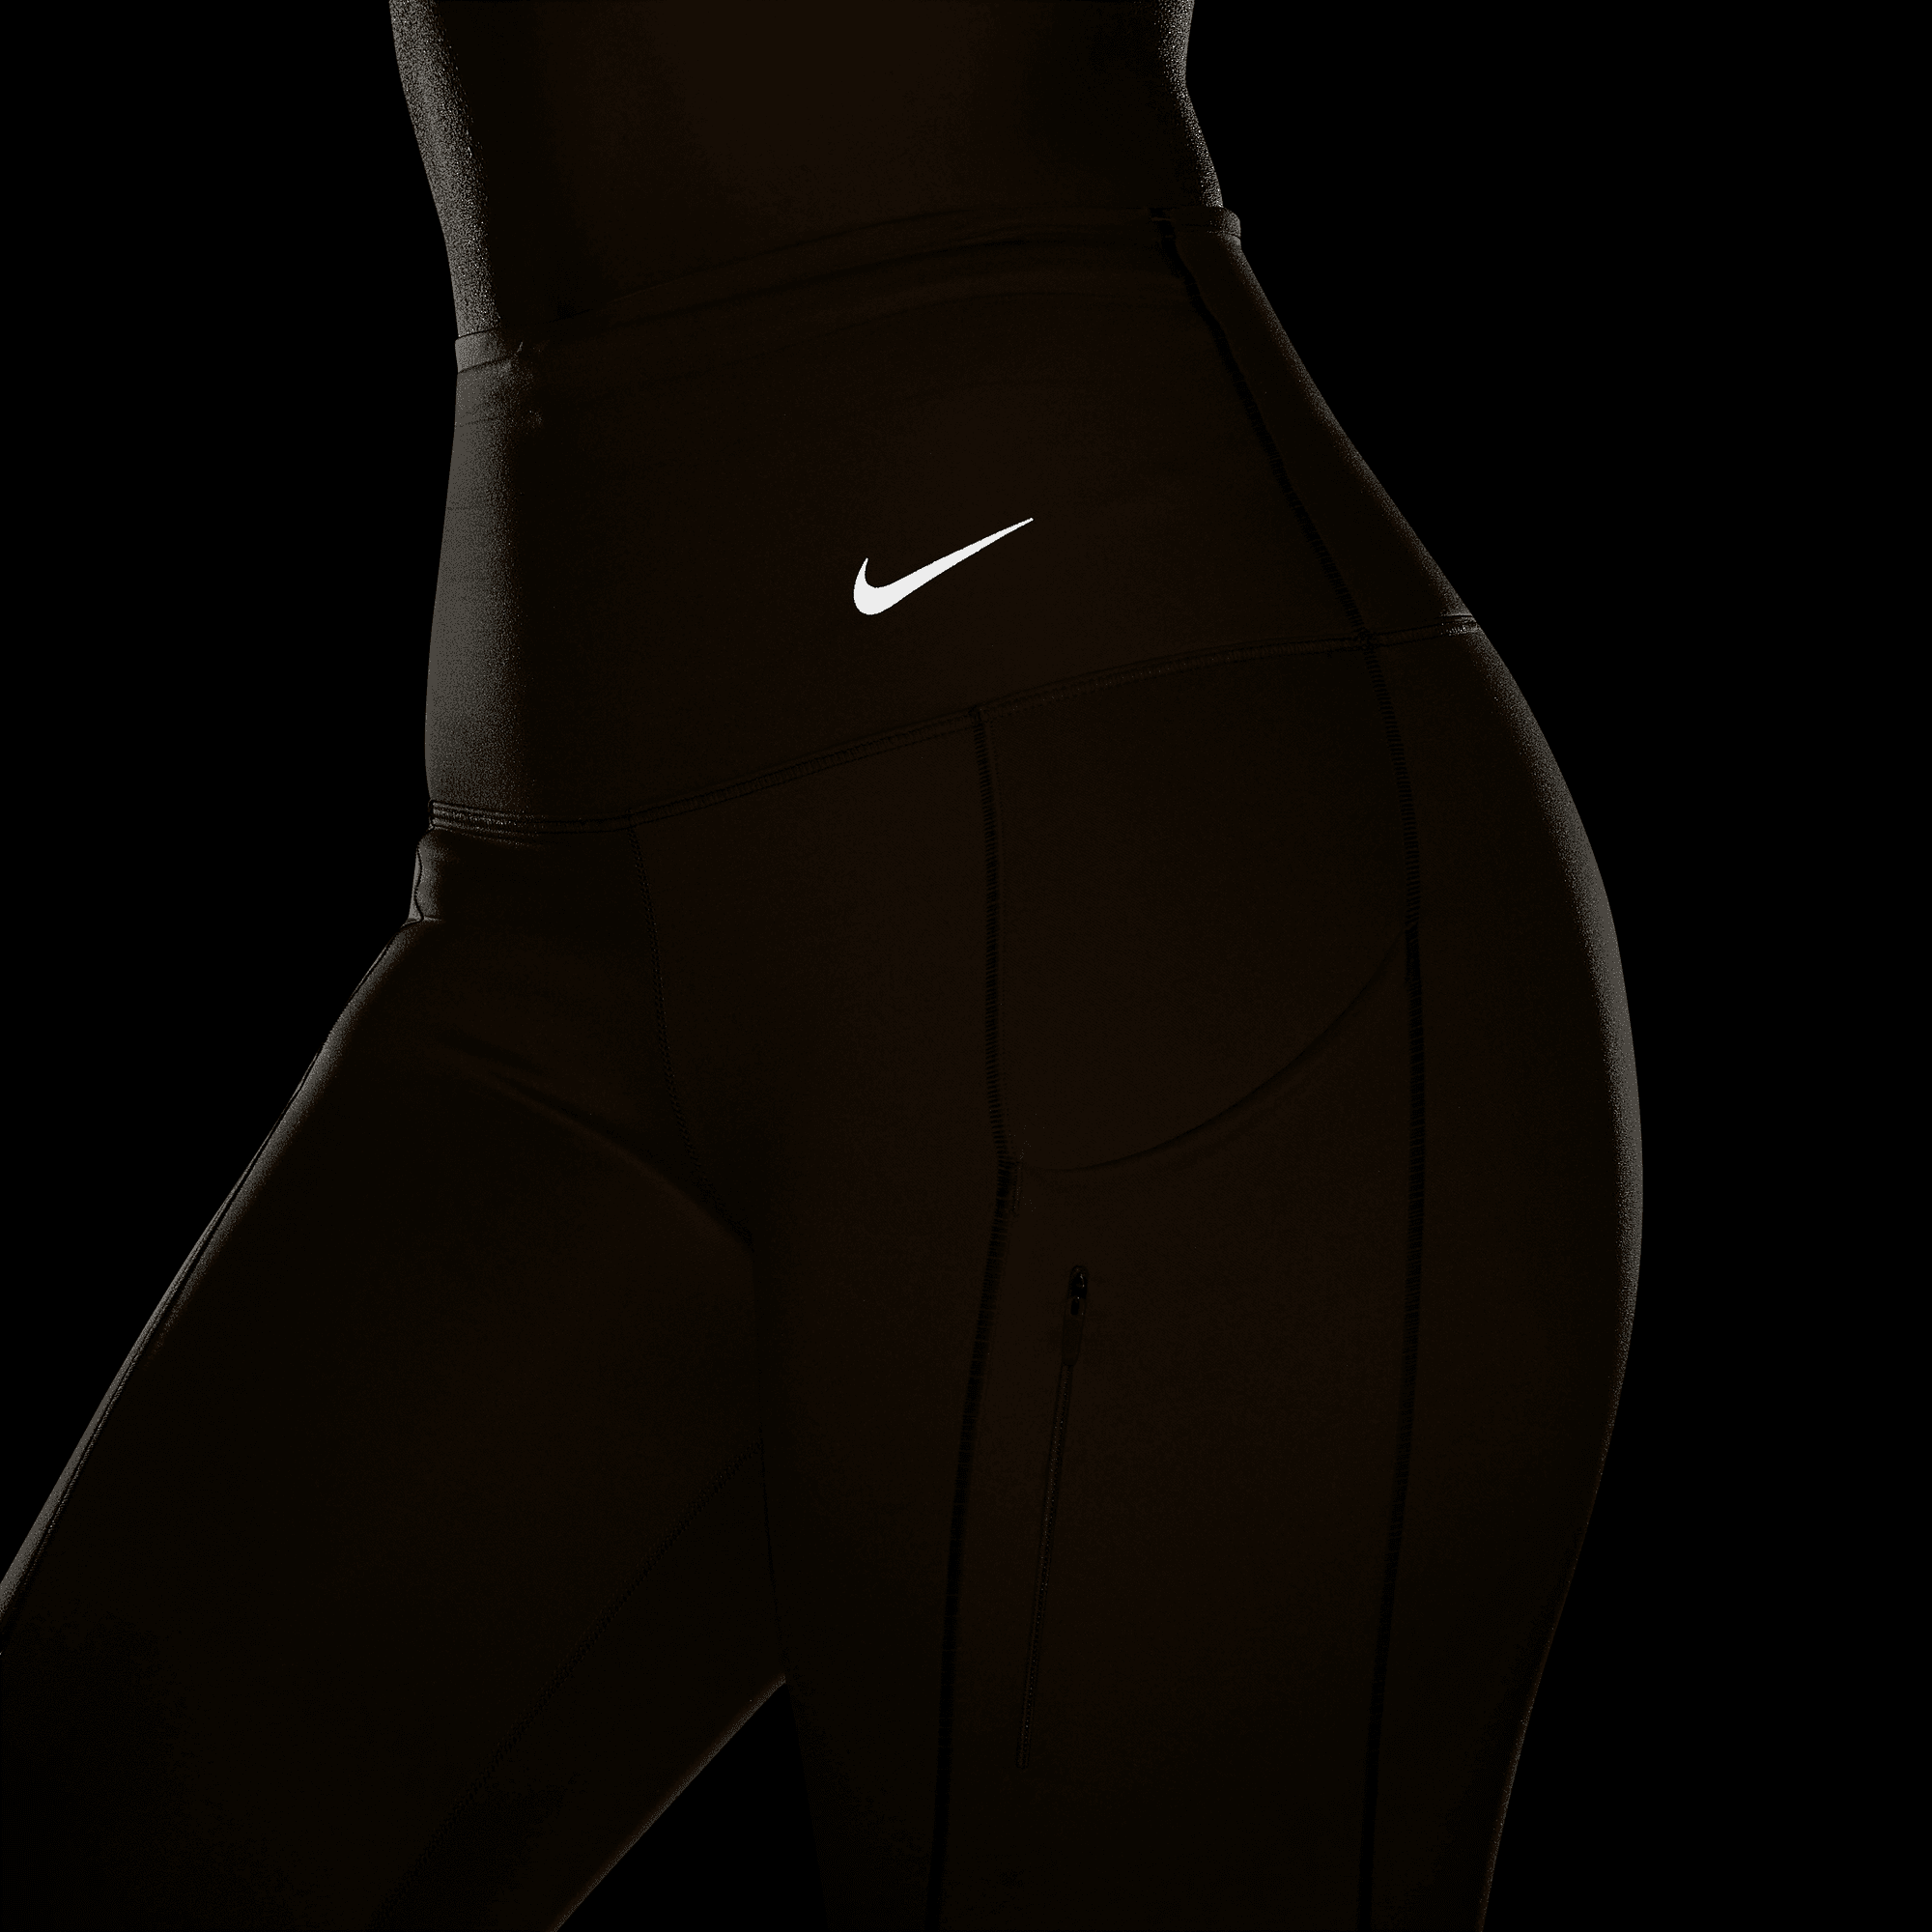 Nike Go Women's Firm-Support High-Waisted Capri Leggings with Pockets